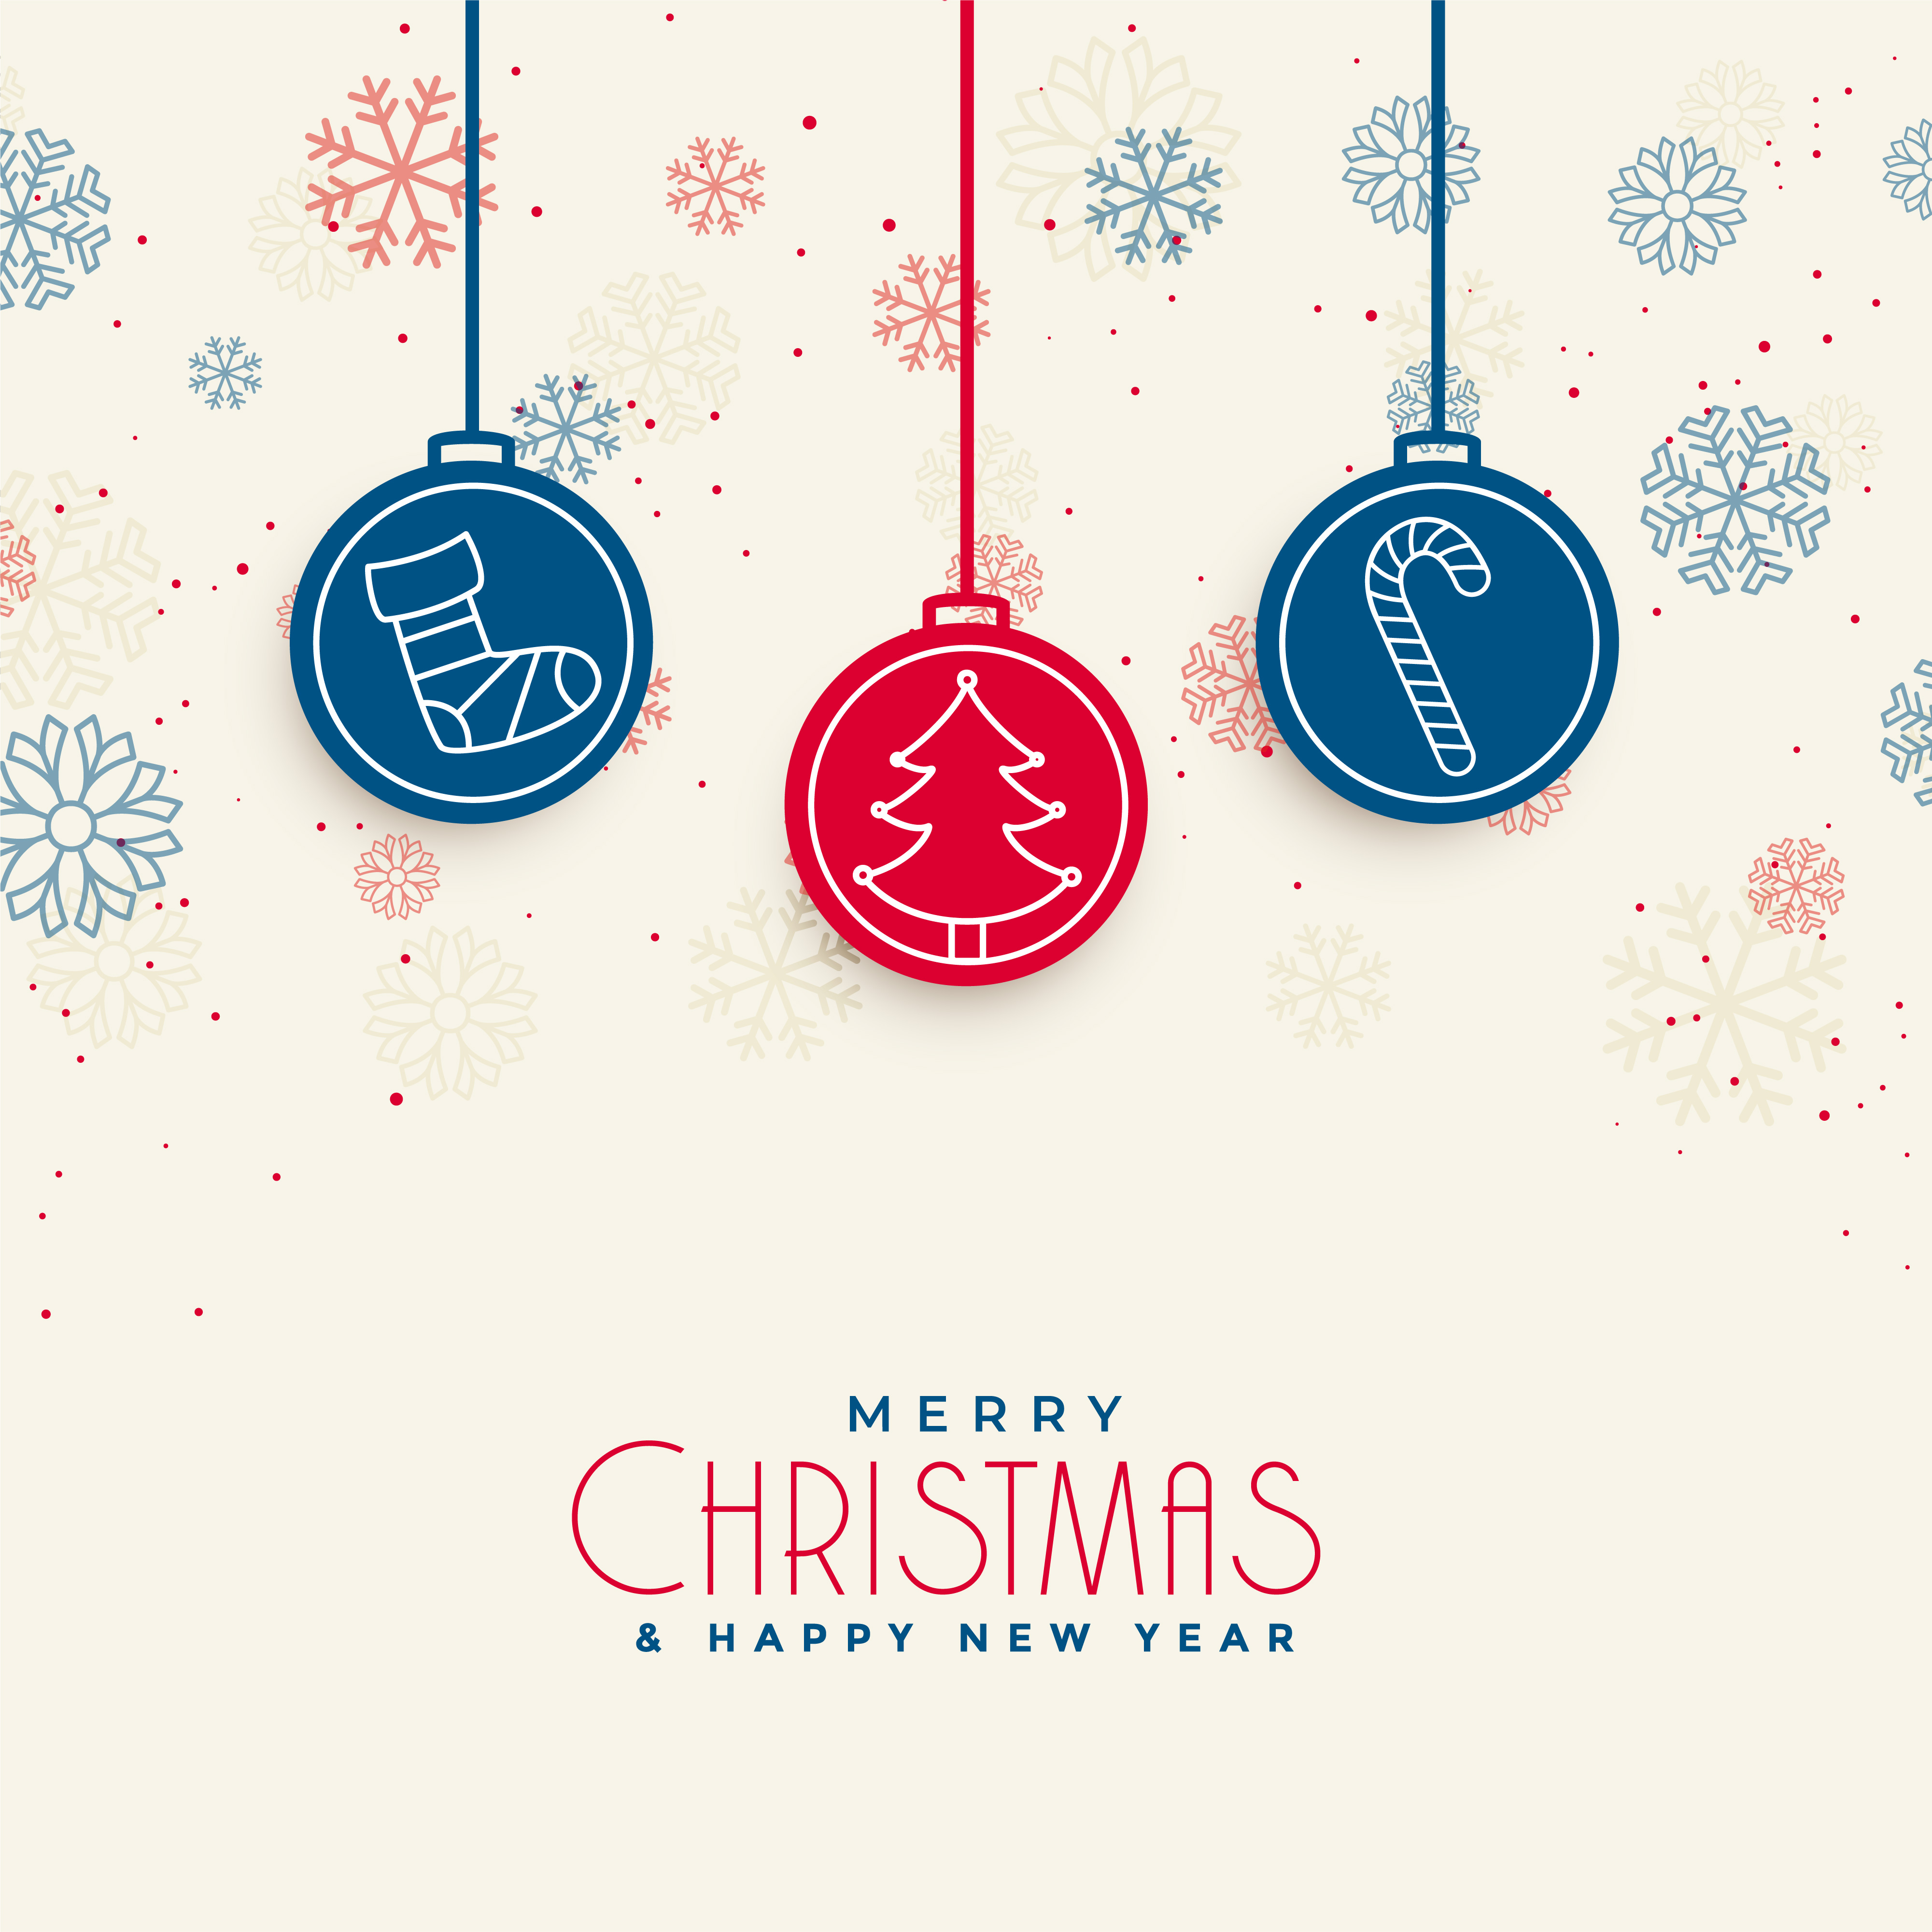 docrative merry christmas card design with xmas elements - Download Free Vector Art, Stock